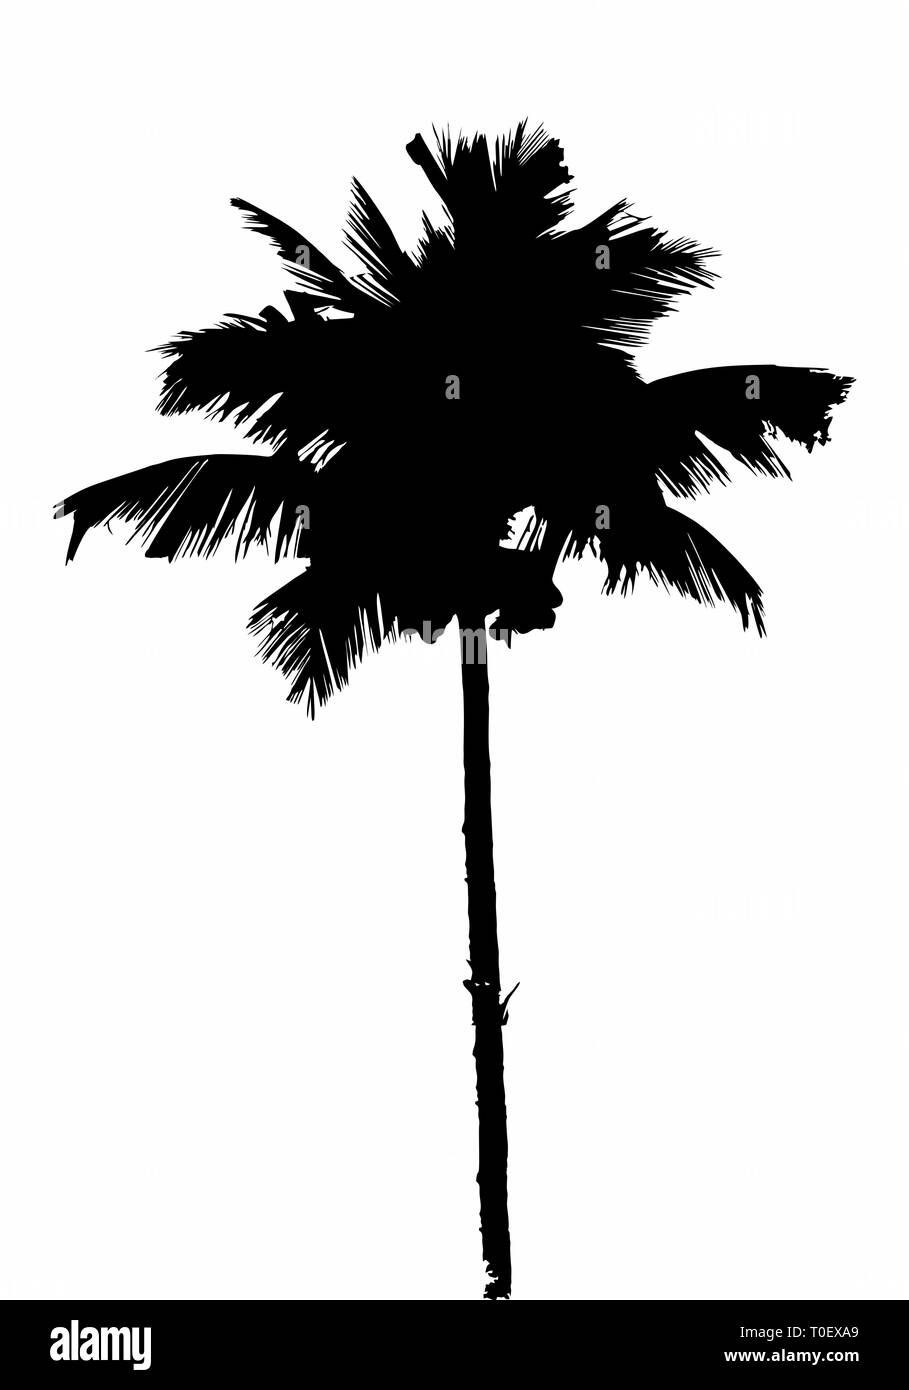 Palm tree silhouette Stock Vector